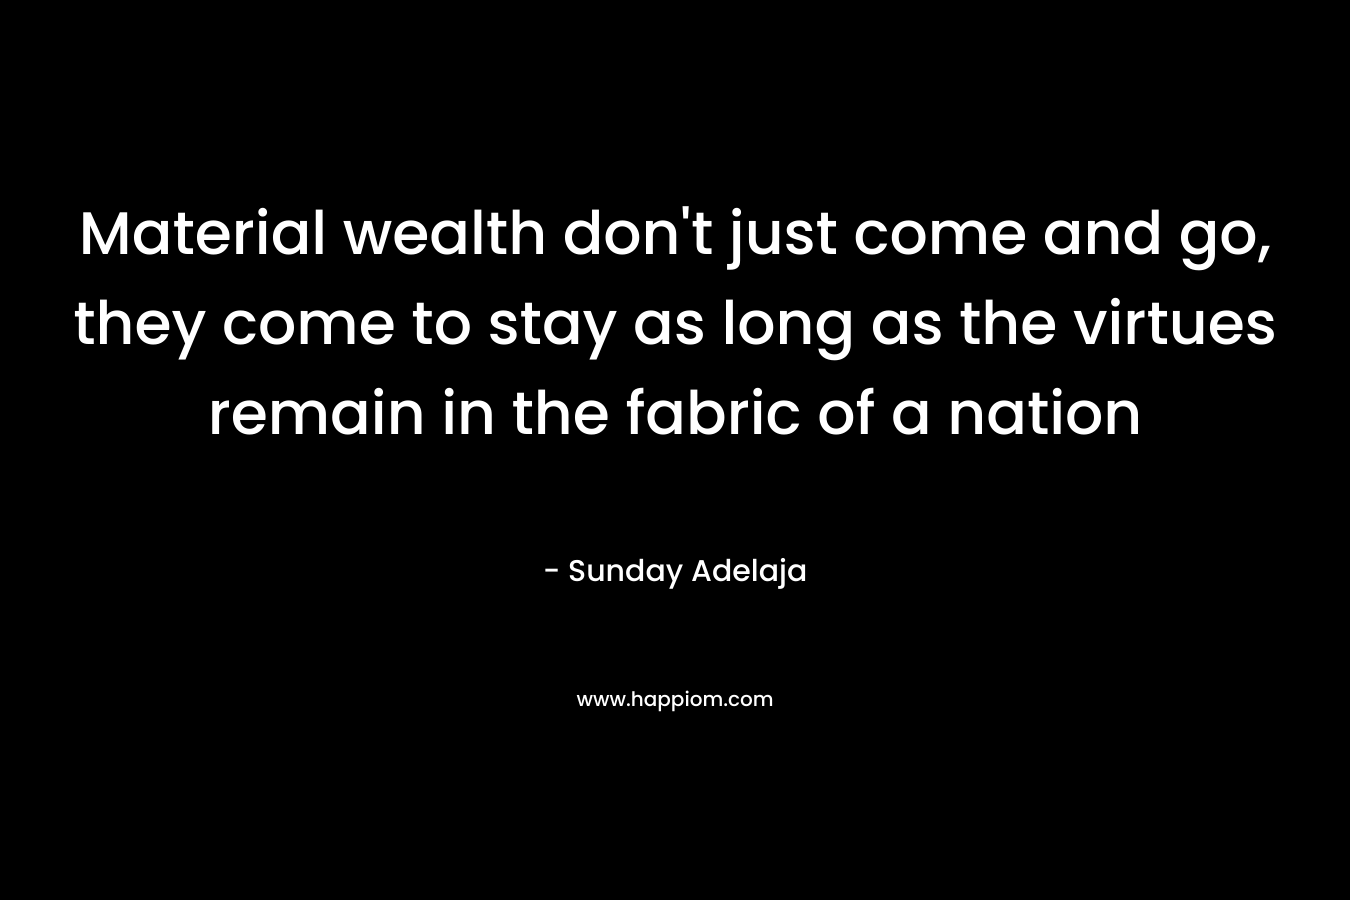 Material wealth don't just come and go, they come to stay as long as the virtues remain in the fabric of a nation